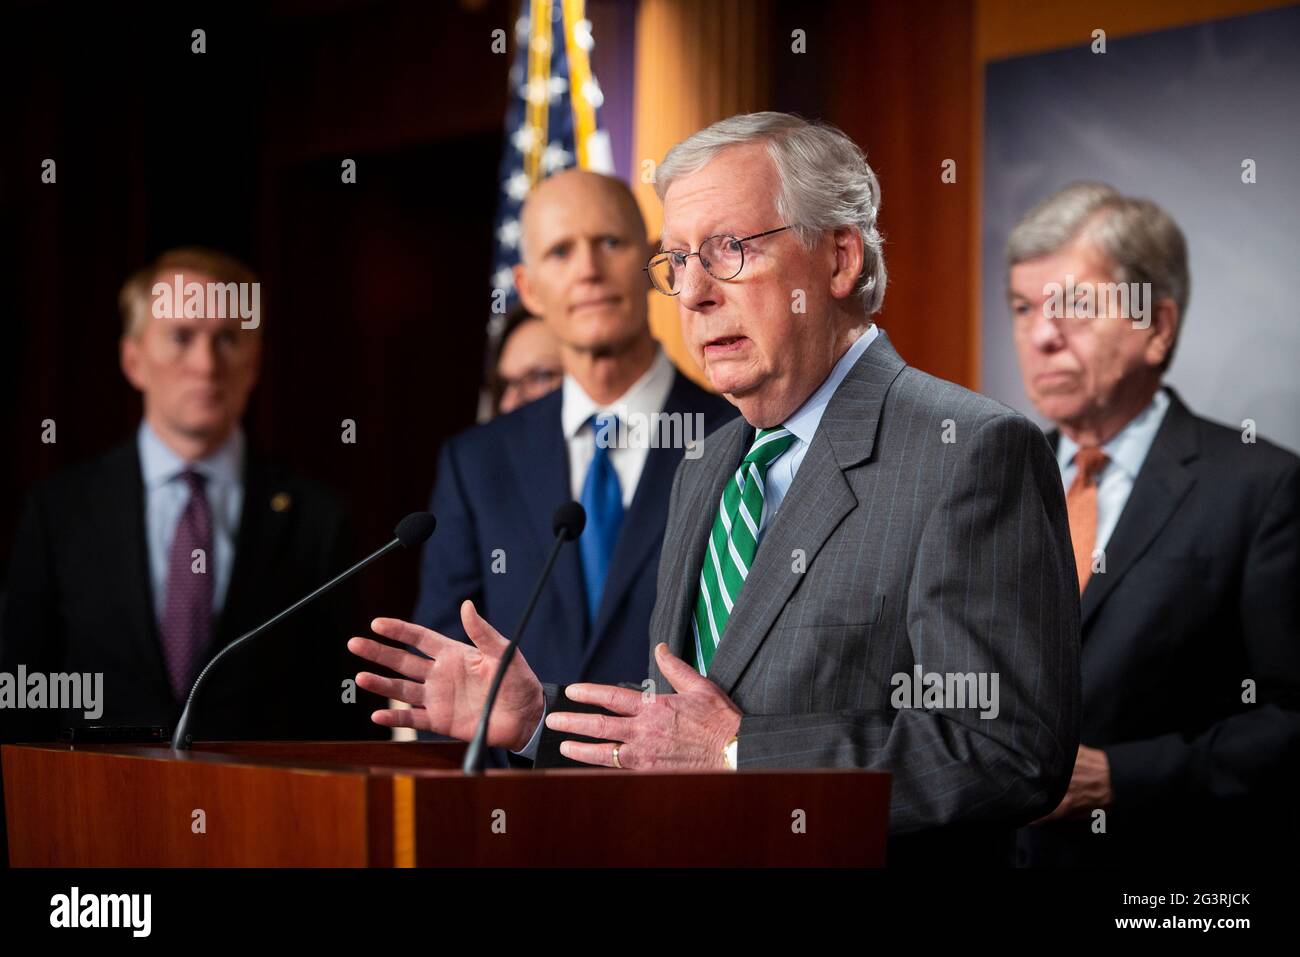 United States Senate Minority Leader Mitch McConnell (Republican of Kentucky) offers remarks during a press conference to express opposition to the For the People Act at the US Capitol in Washington, DC, Thursday, June 17, 2021. Credit: Rod Lamkey/CNP /MediaPunch Stock Photo